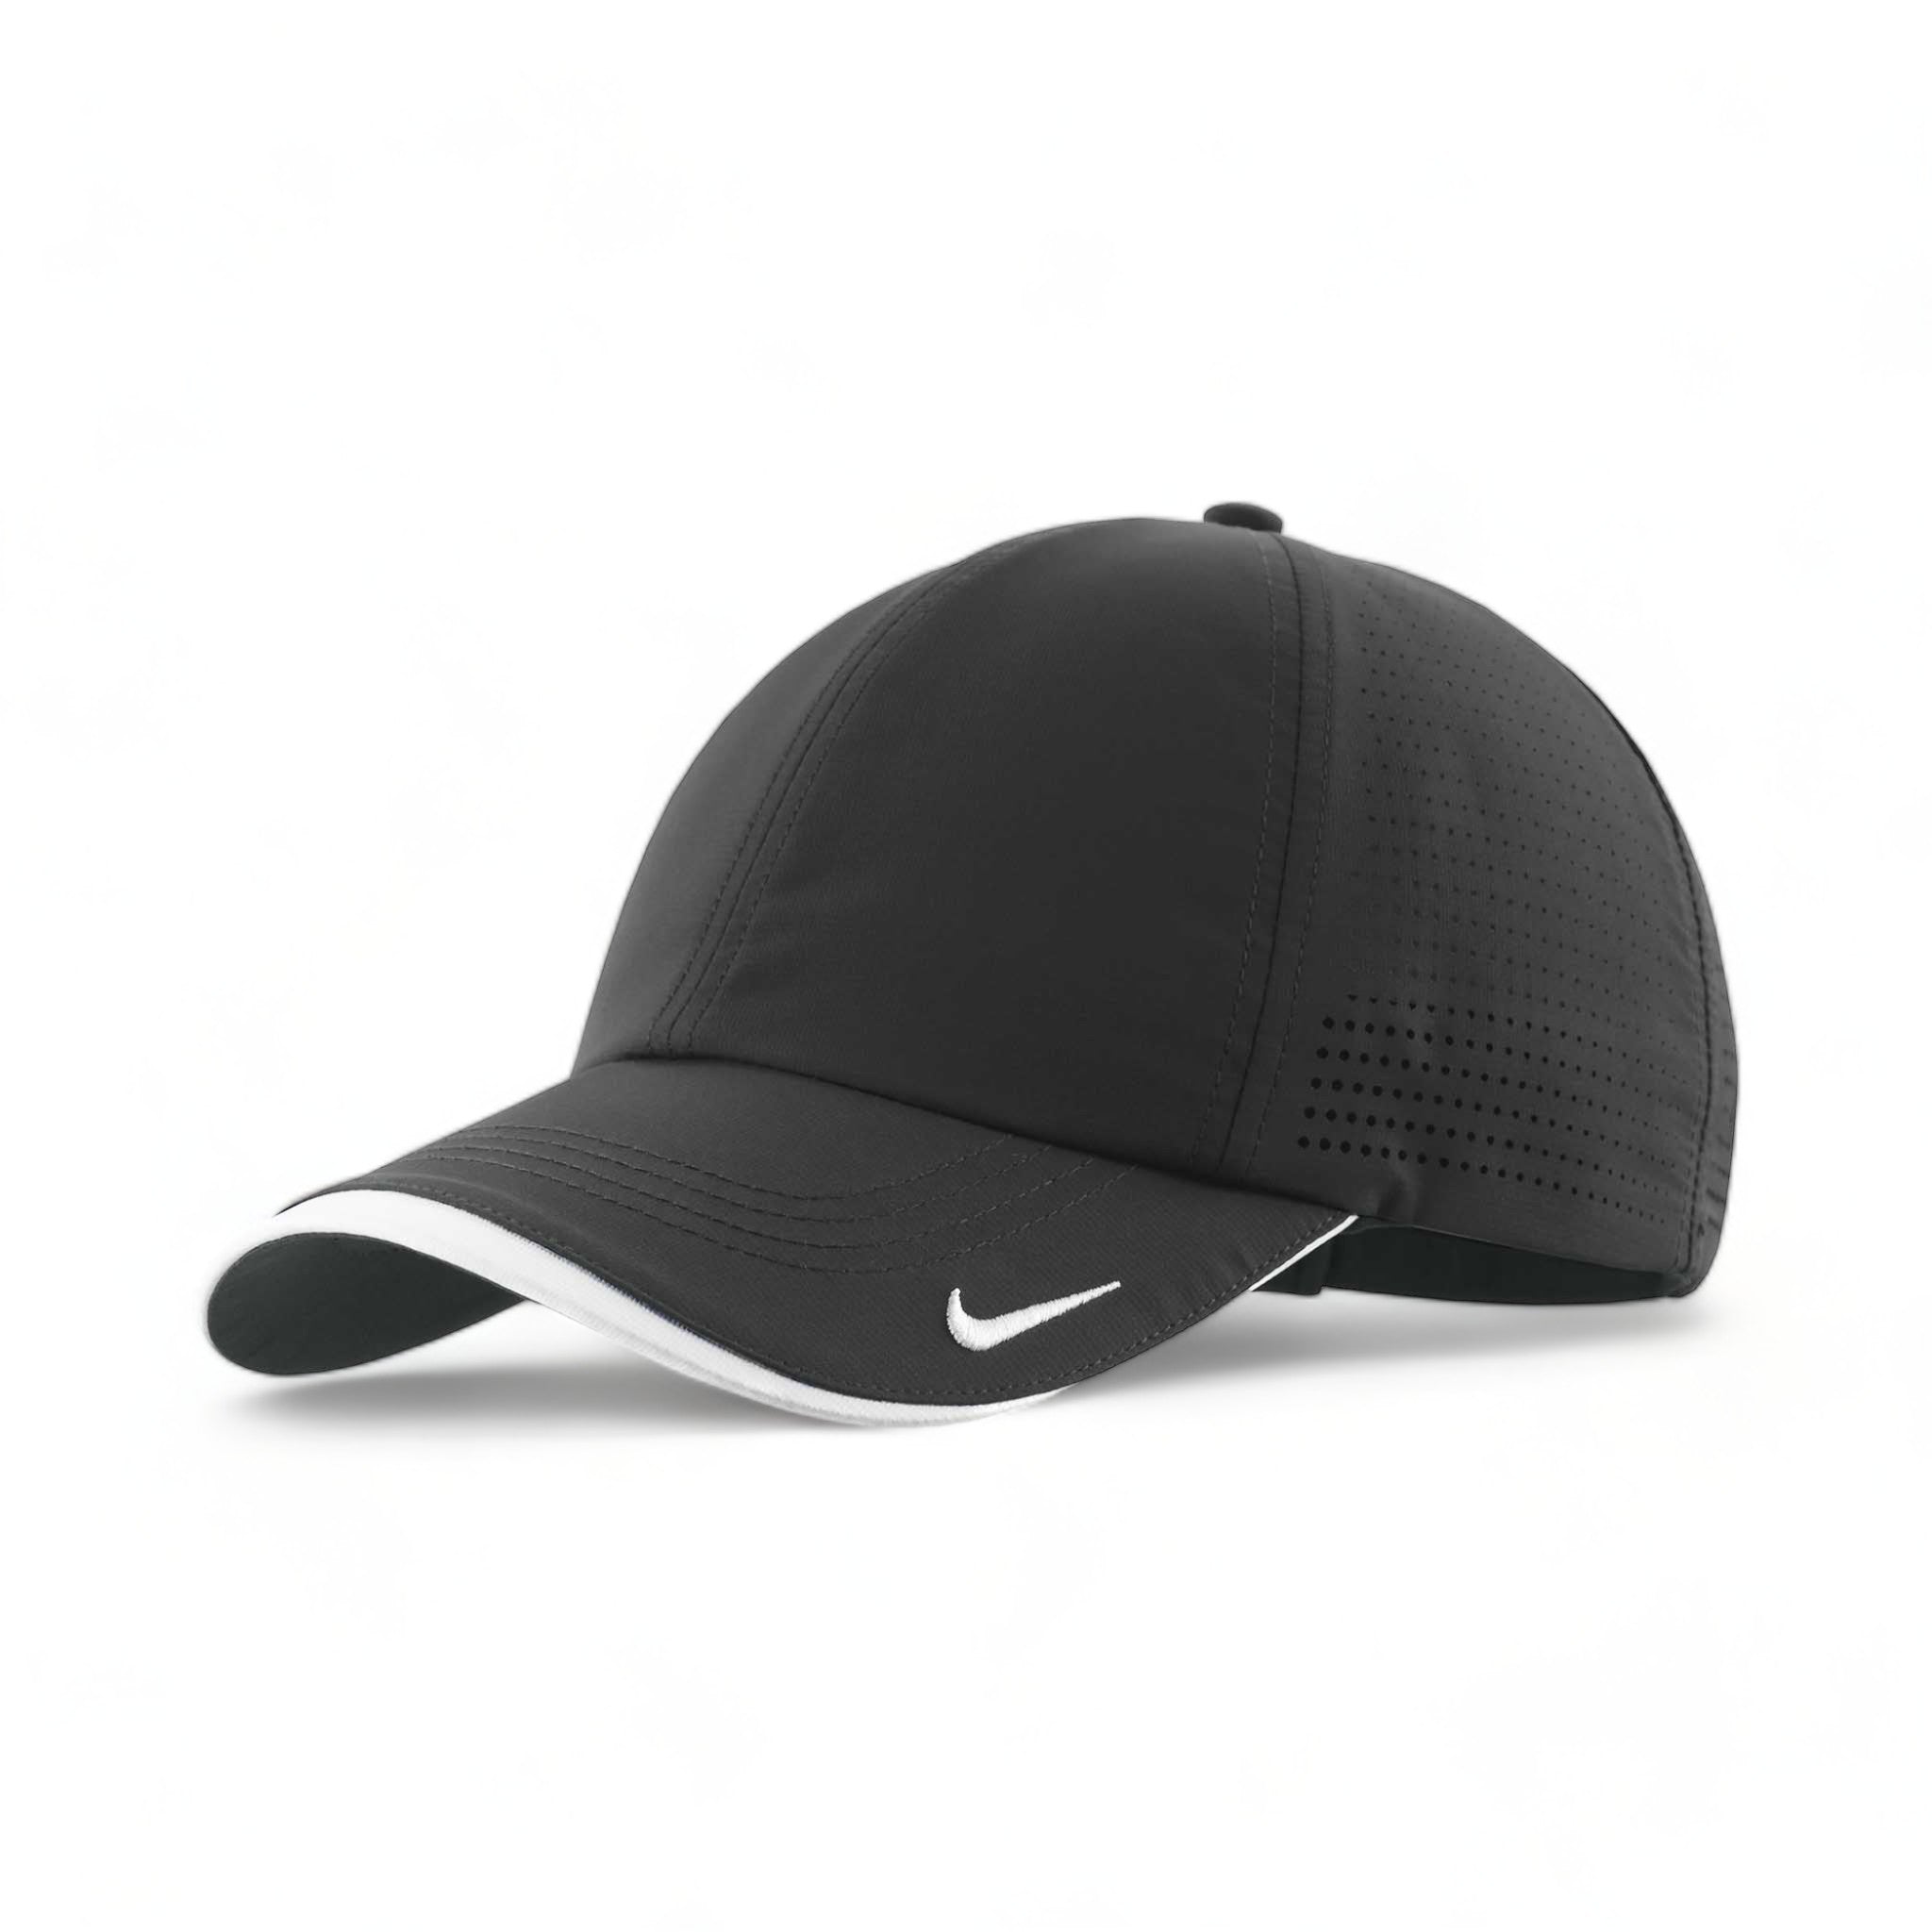 Side view of Nike NKFB6445 custom hat in anthracite and white